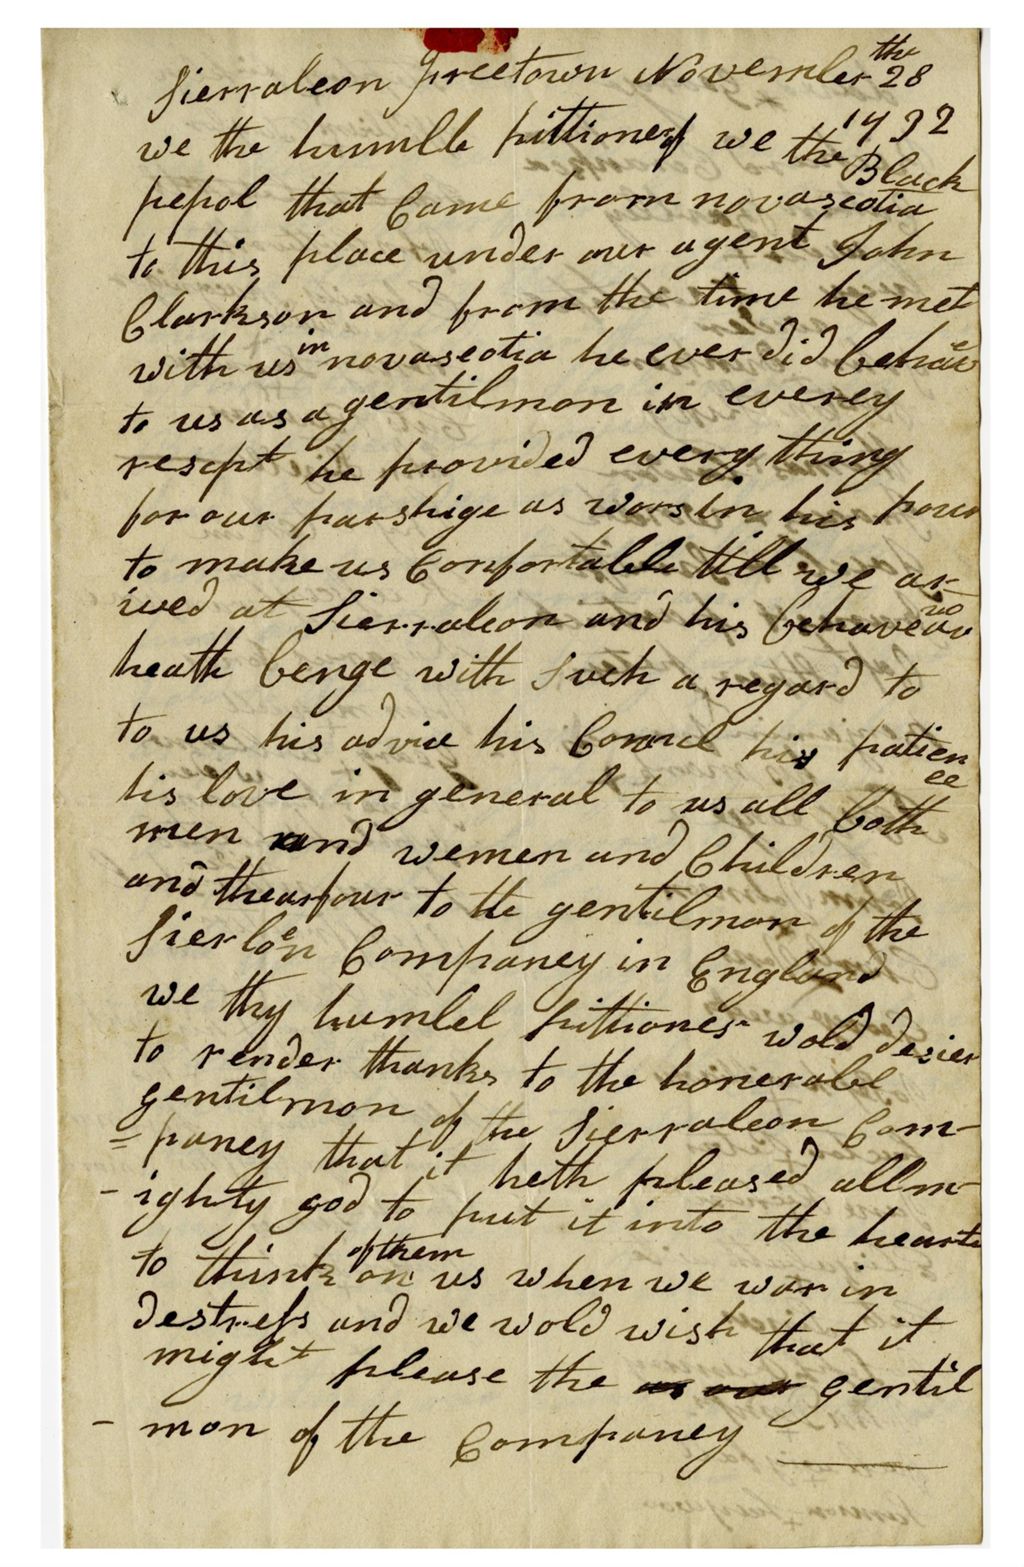 Letter from black petitioners to John Clarkson